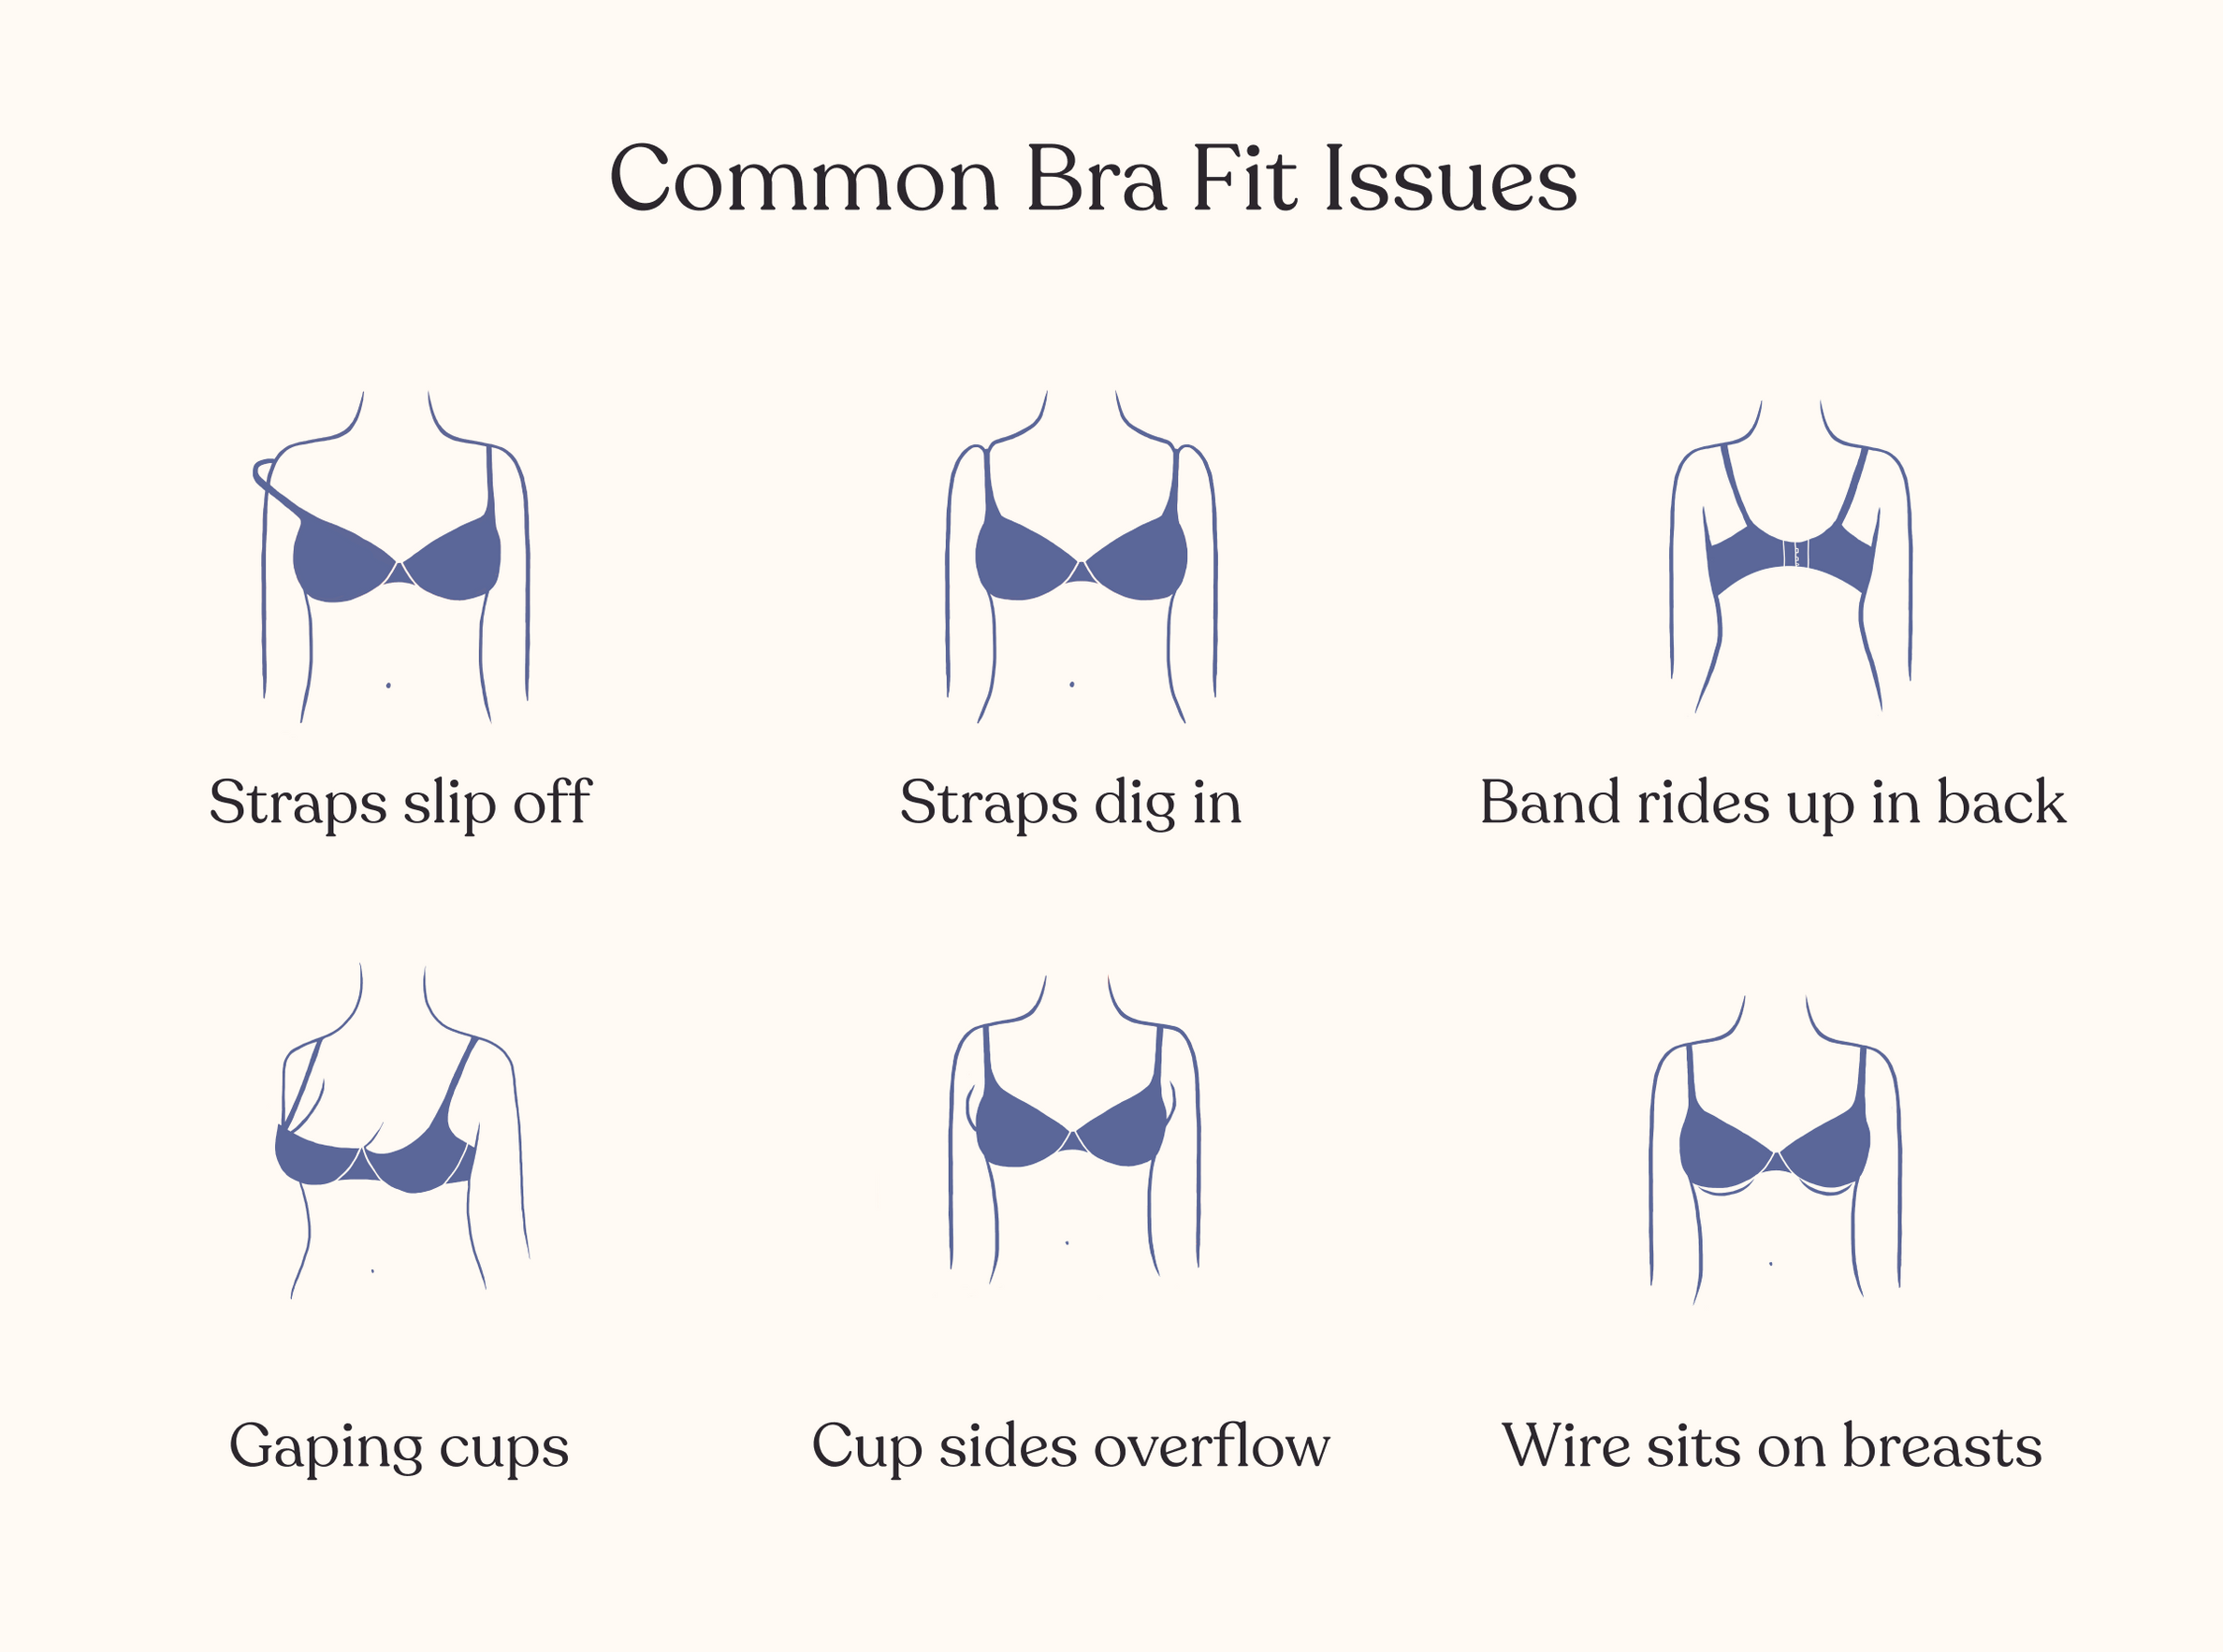 Does the hunt for bra sizes make you anxious - Especially Big Cup Bras?